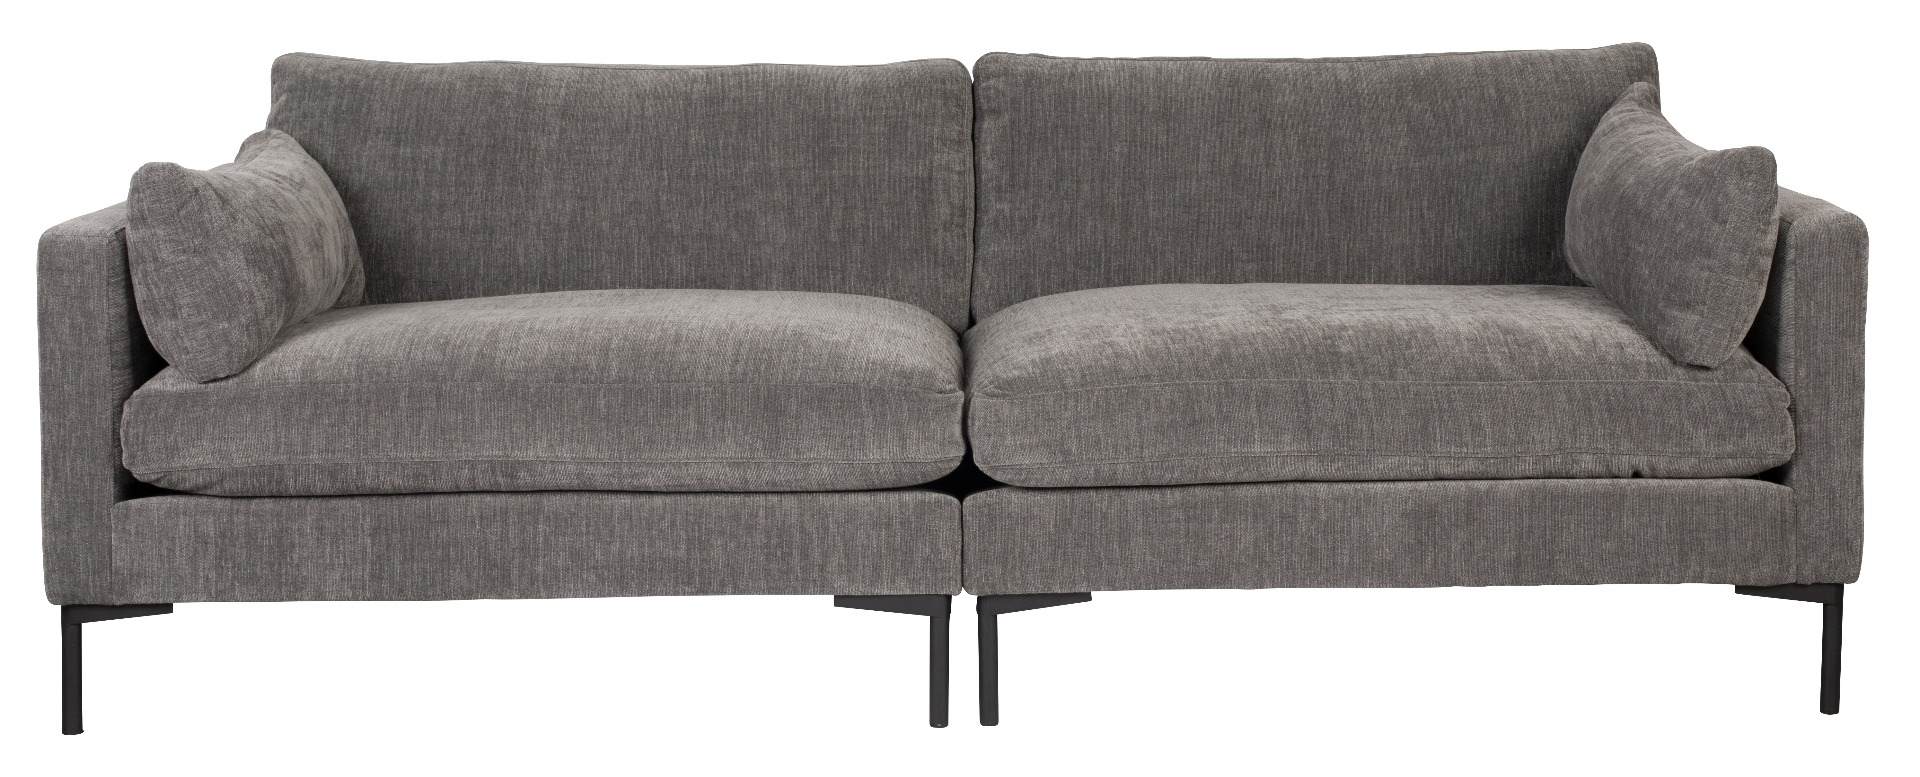 Sofa Summer 3 Seater in Anthracite